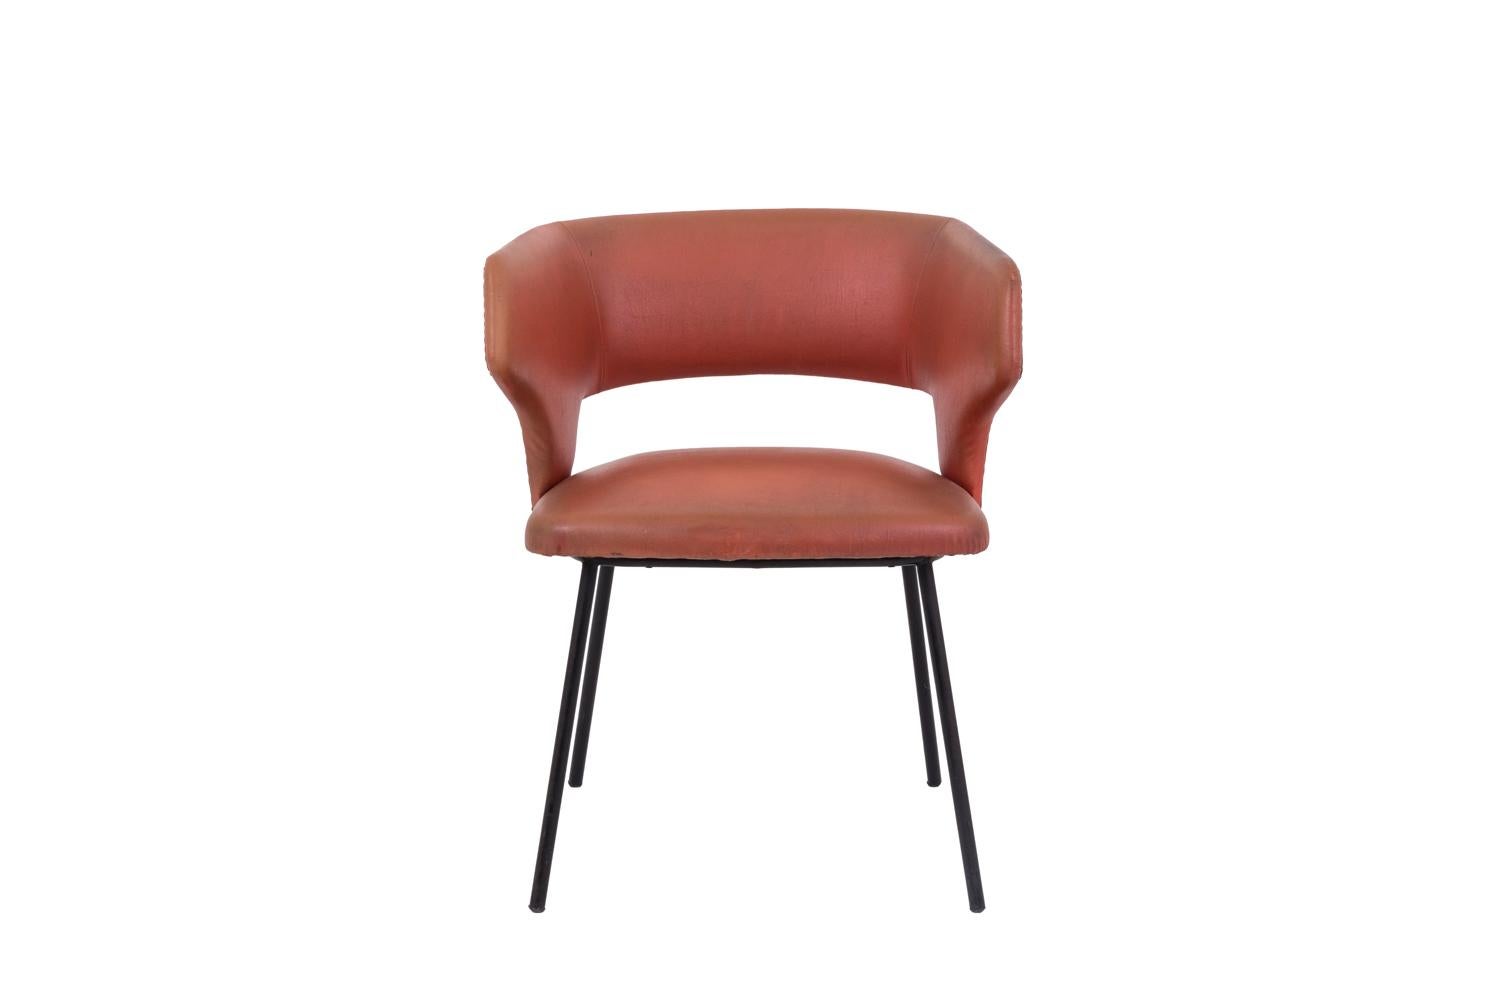 Armchair in orange skai standing on four black lacquered tubular metal legs. Lower openwork basket back and skai studded on the armchair back. Rectangular slightly bulged seat.

Orange skai slightly patinated due to time and use.

Work realized